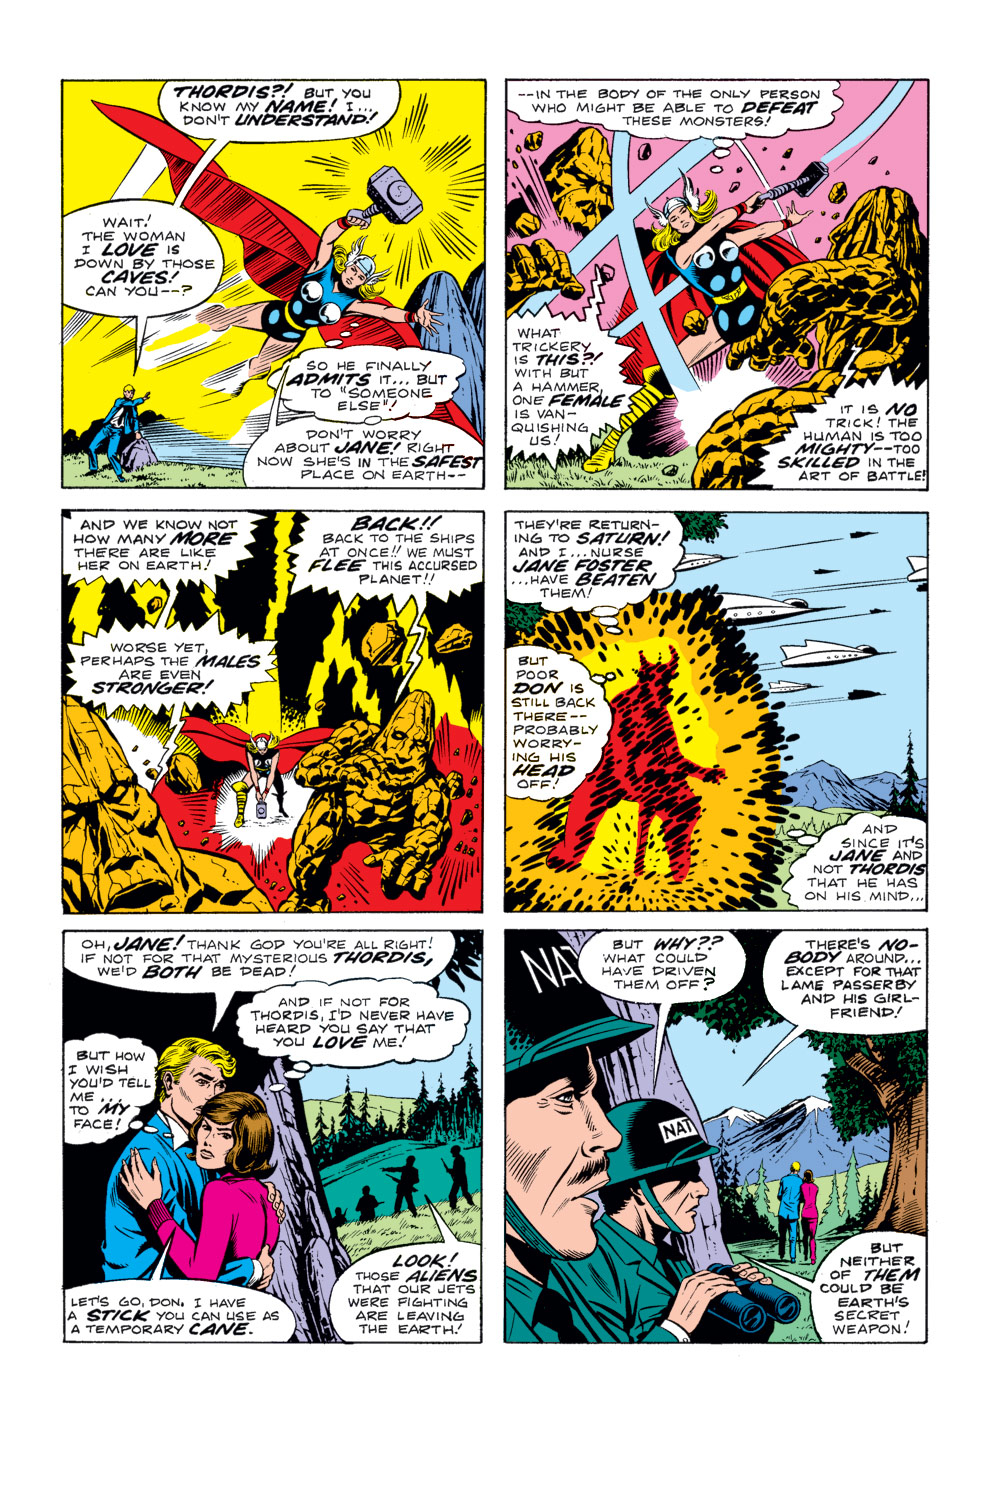 What If? (1977) issue 10 - Jane Foster had found the hammer of Thor - Page 11